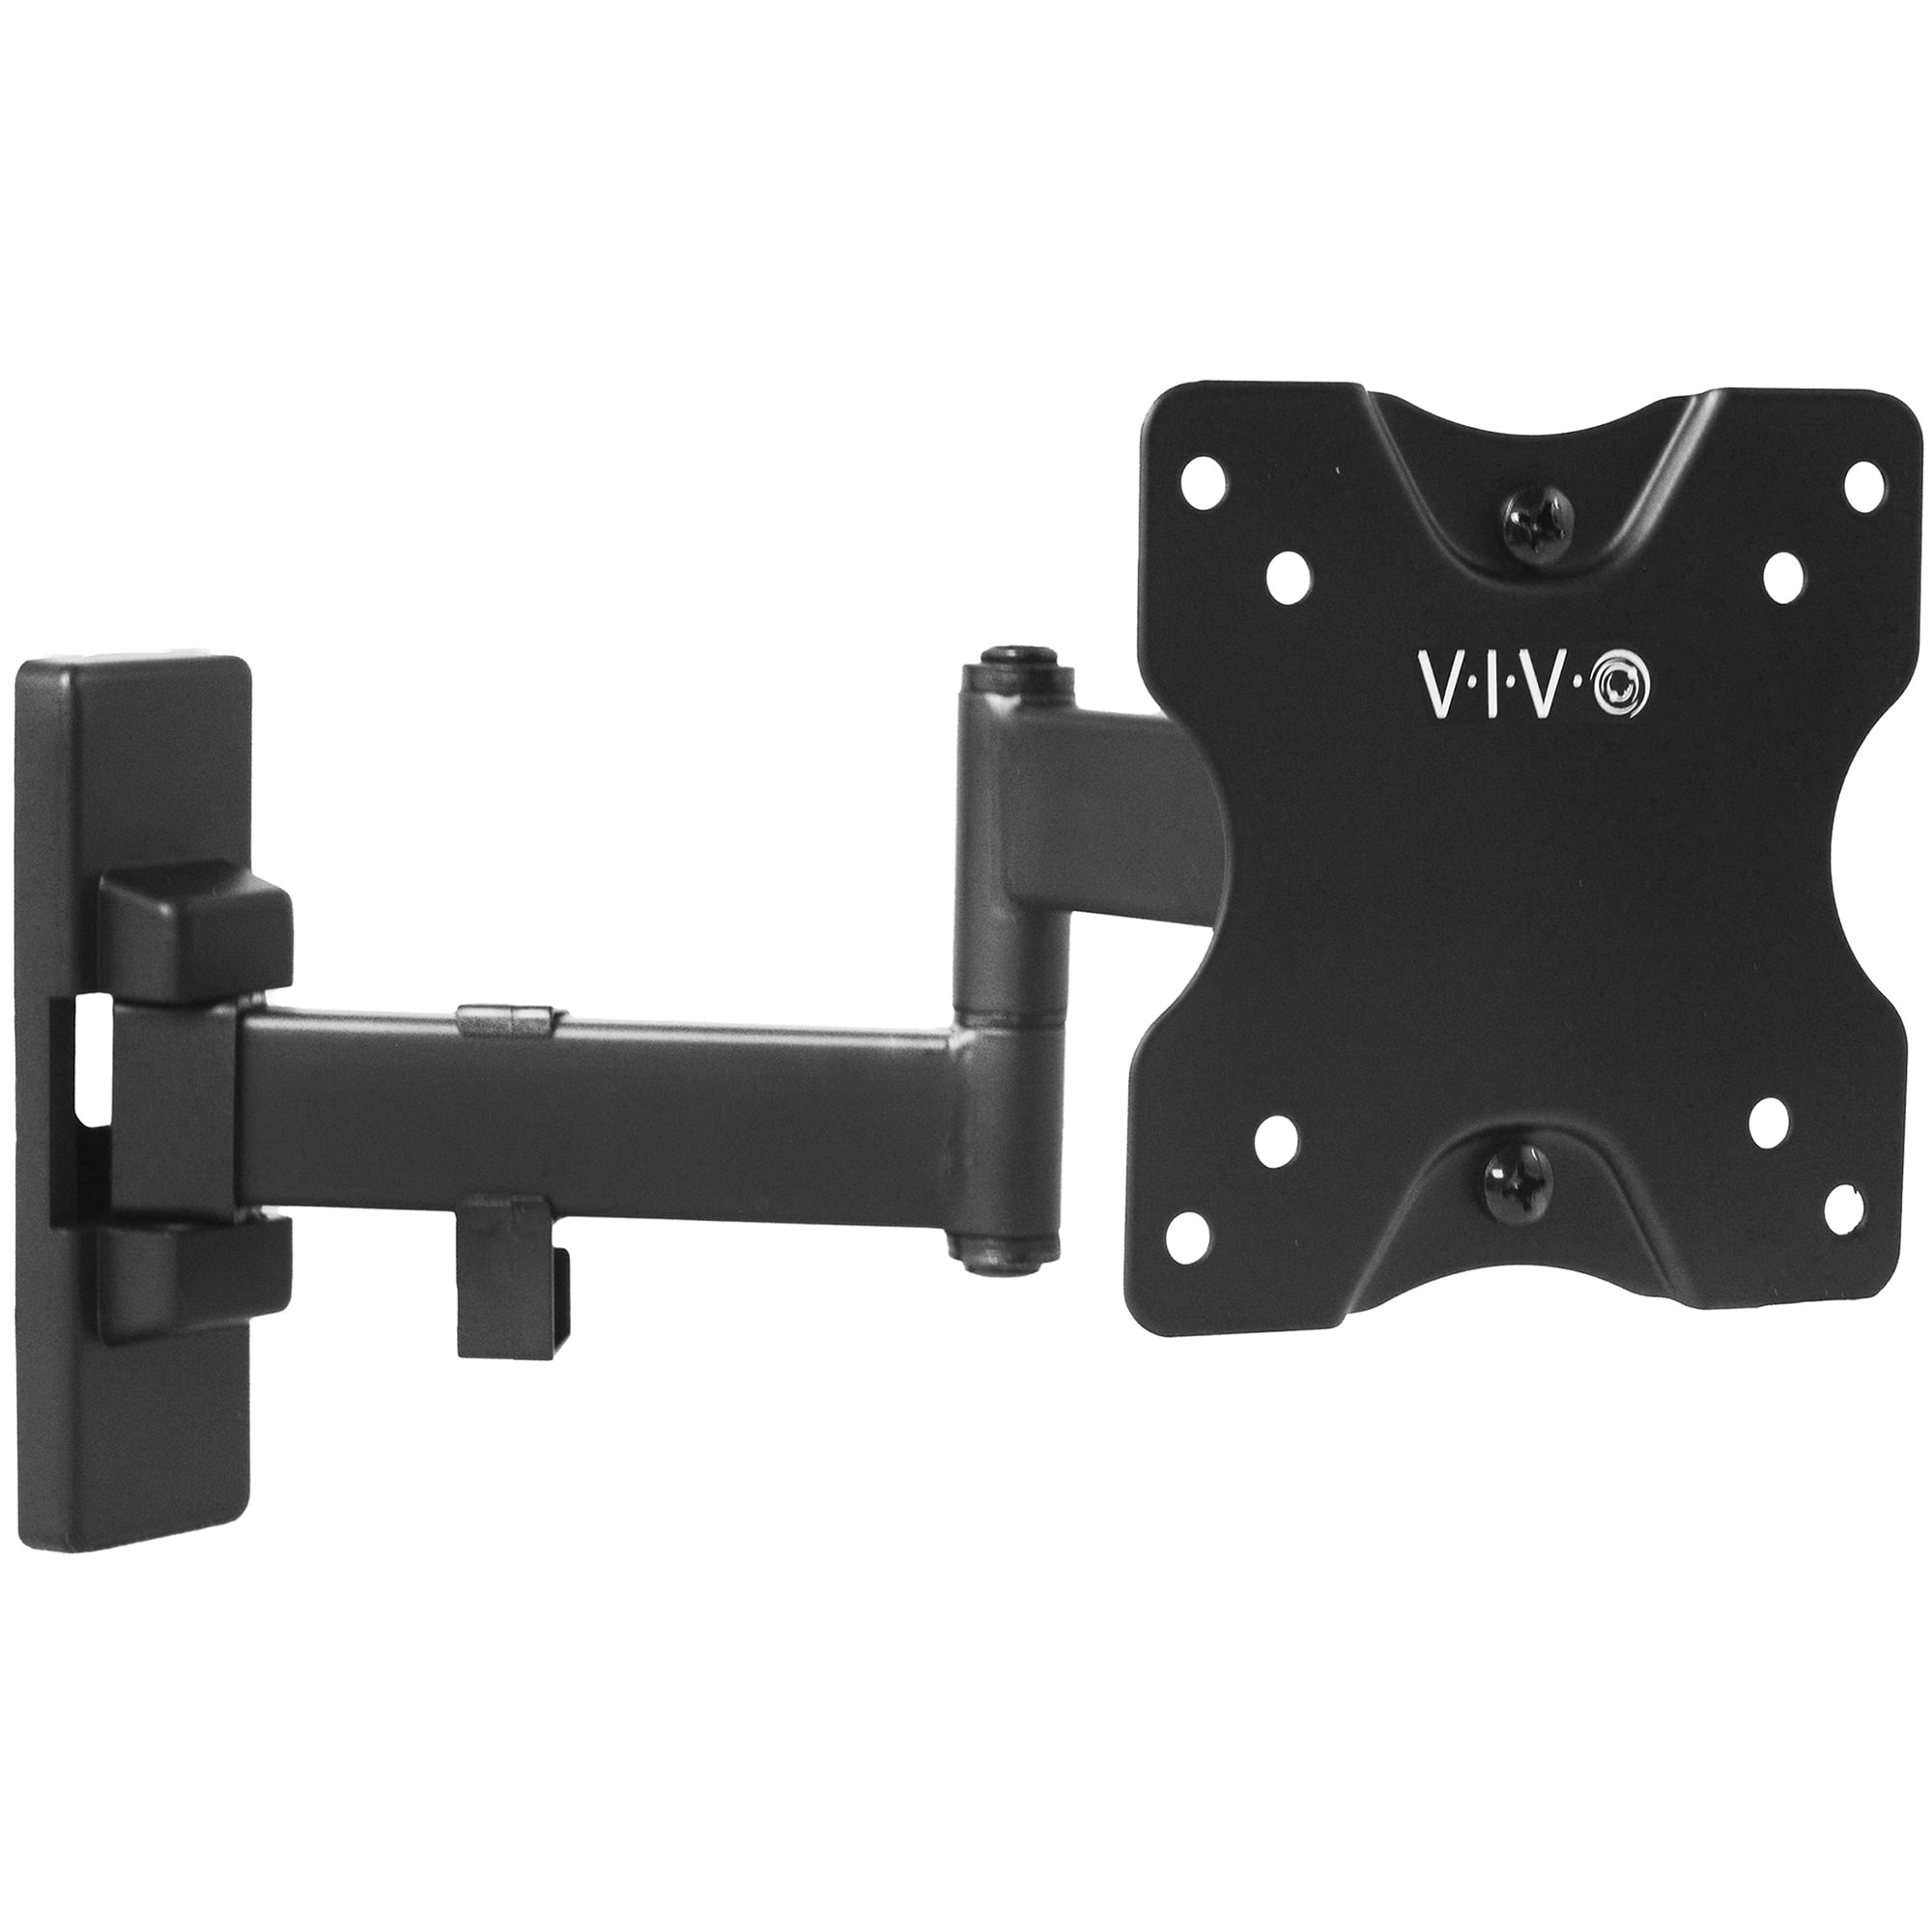 Full Motion TV Wall Mount Monitor Wall Bracket with Swivel Articulating Tilt Arms for 13-55 Inch LCD LED OLED Flat Curved Screens up to 66lbs Max VESA 400x400mm Fit Single Stud by ERGO-INNOVATE 